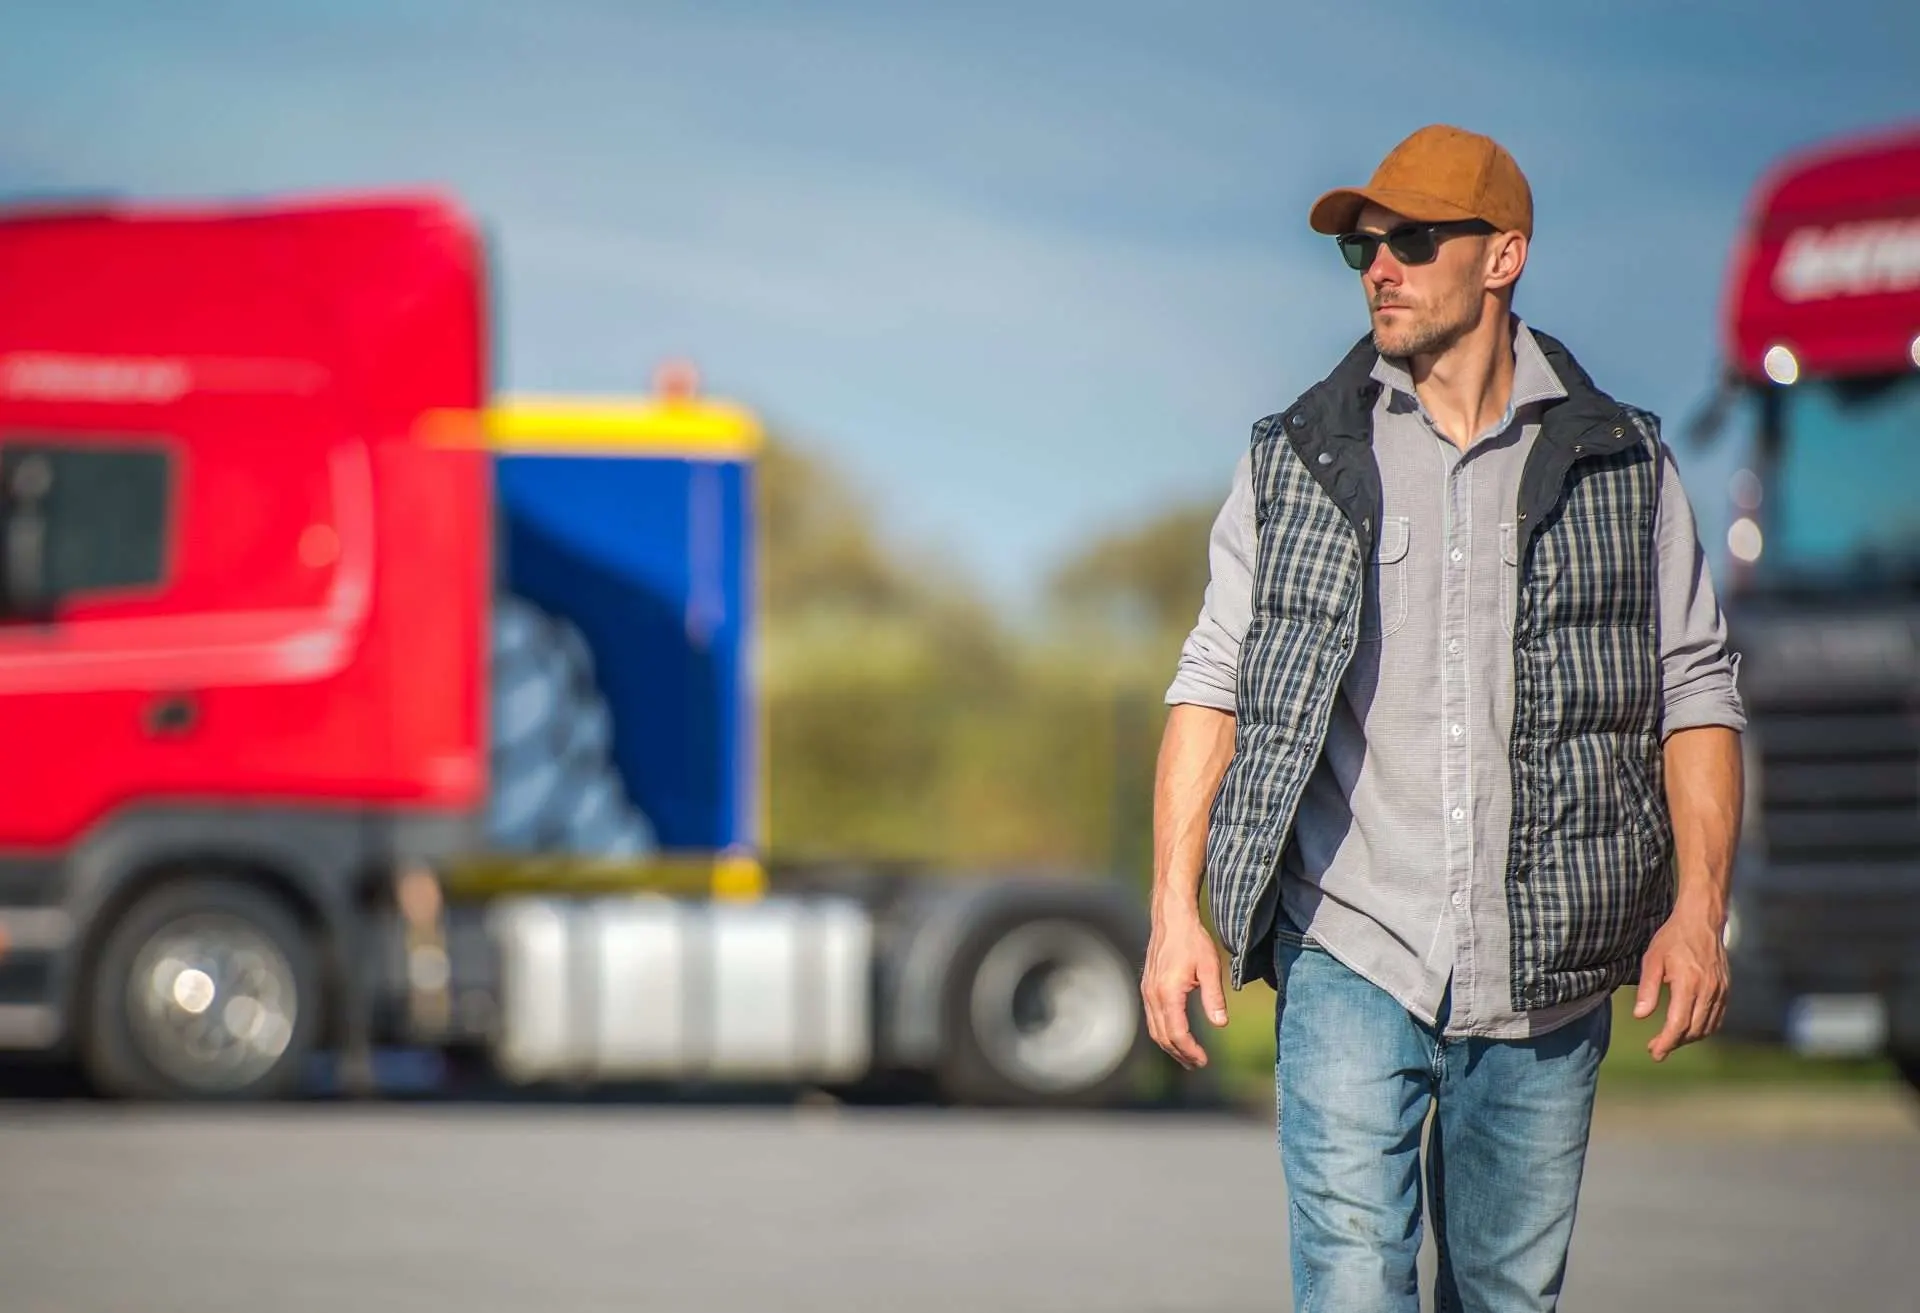 Man walking in front of trucks at truck stop